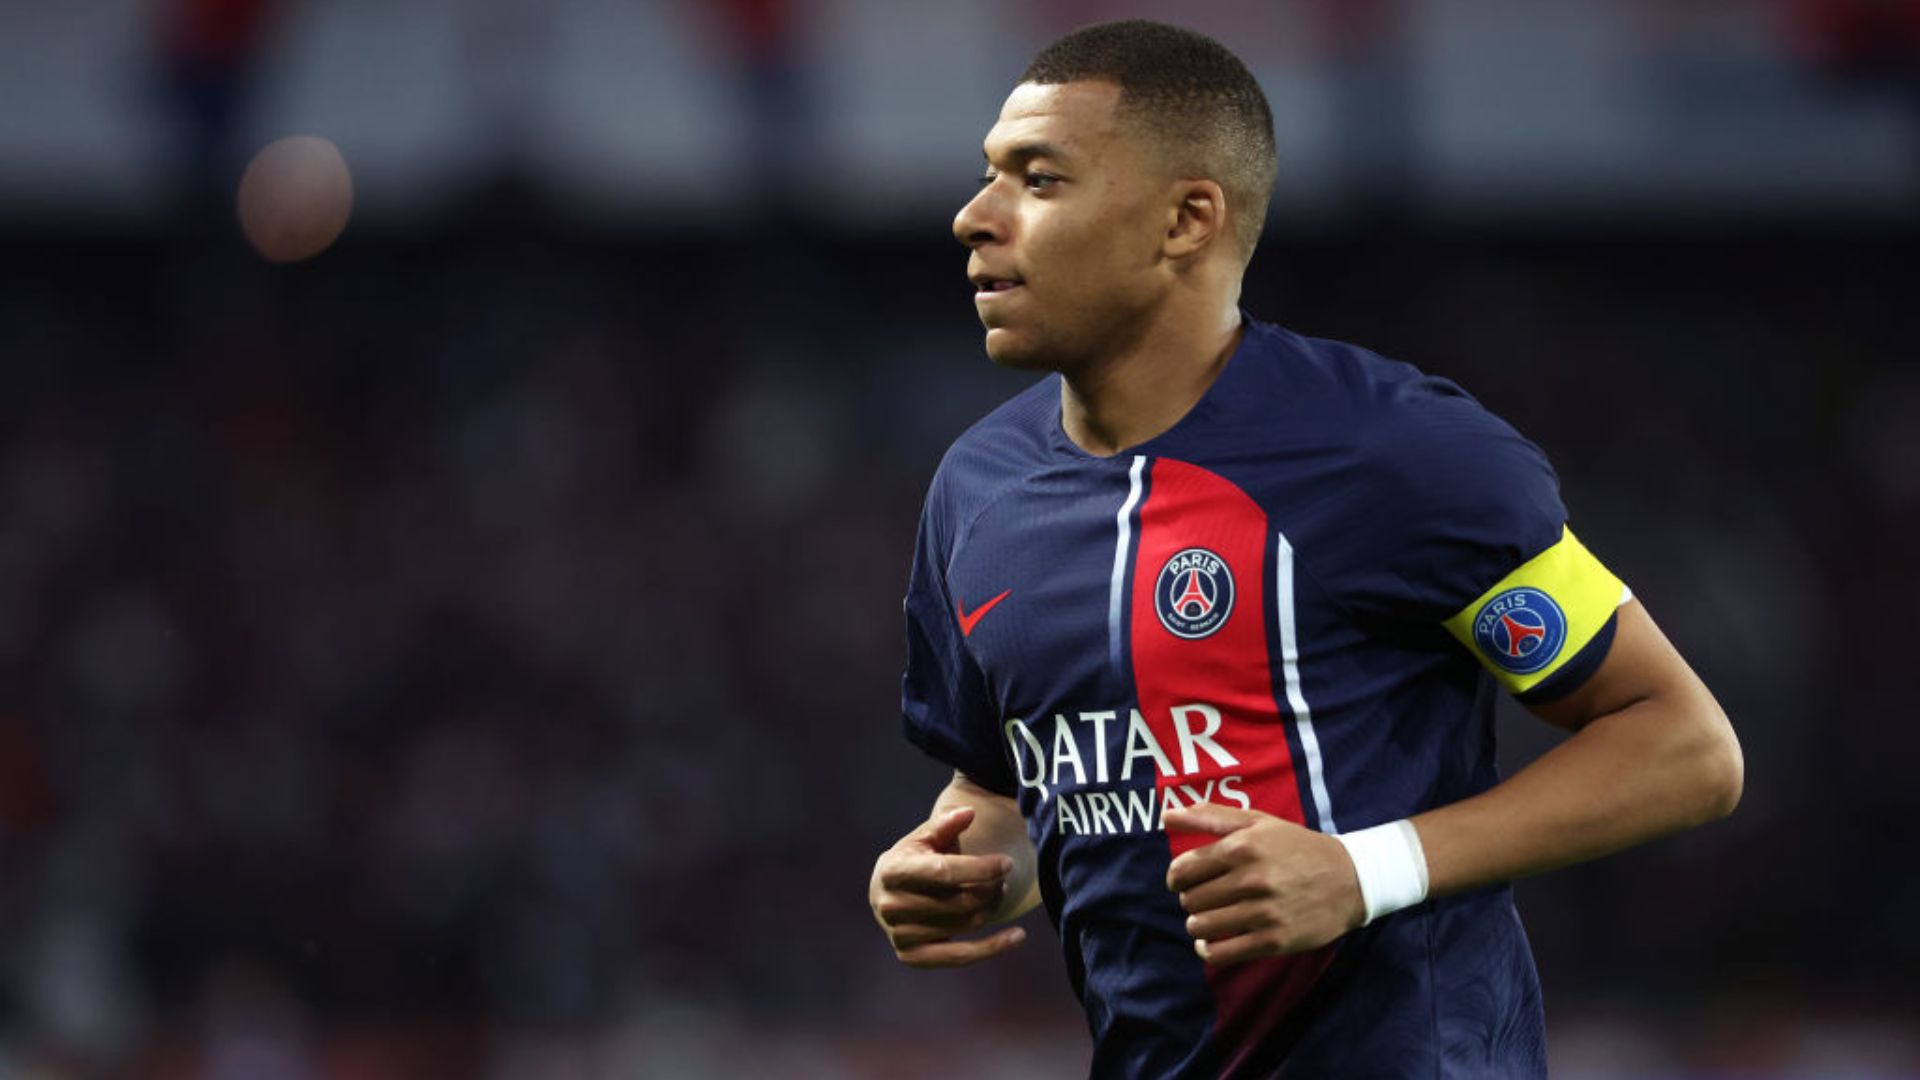 Mbappé was captain of PSG in the last match of the season, against Clermont (Credit: Getty Images)